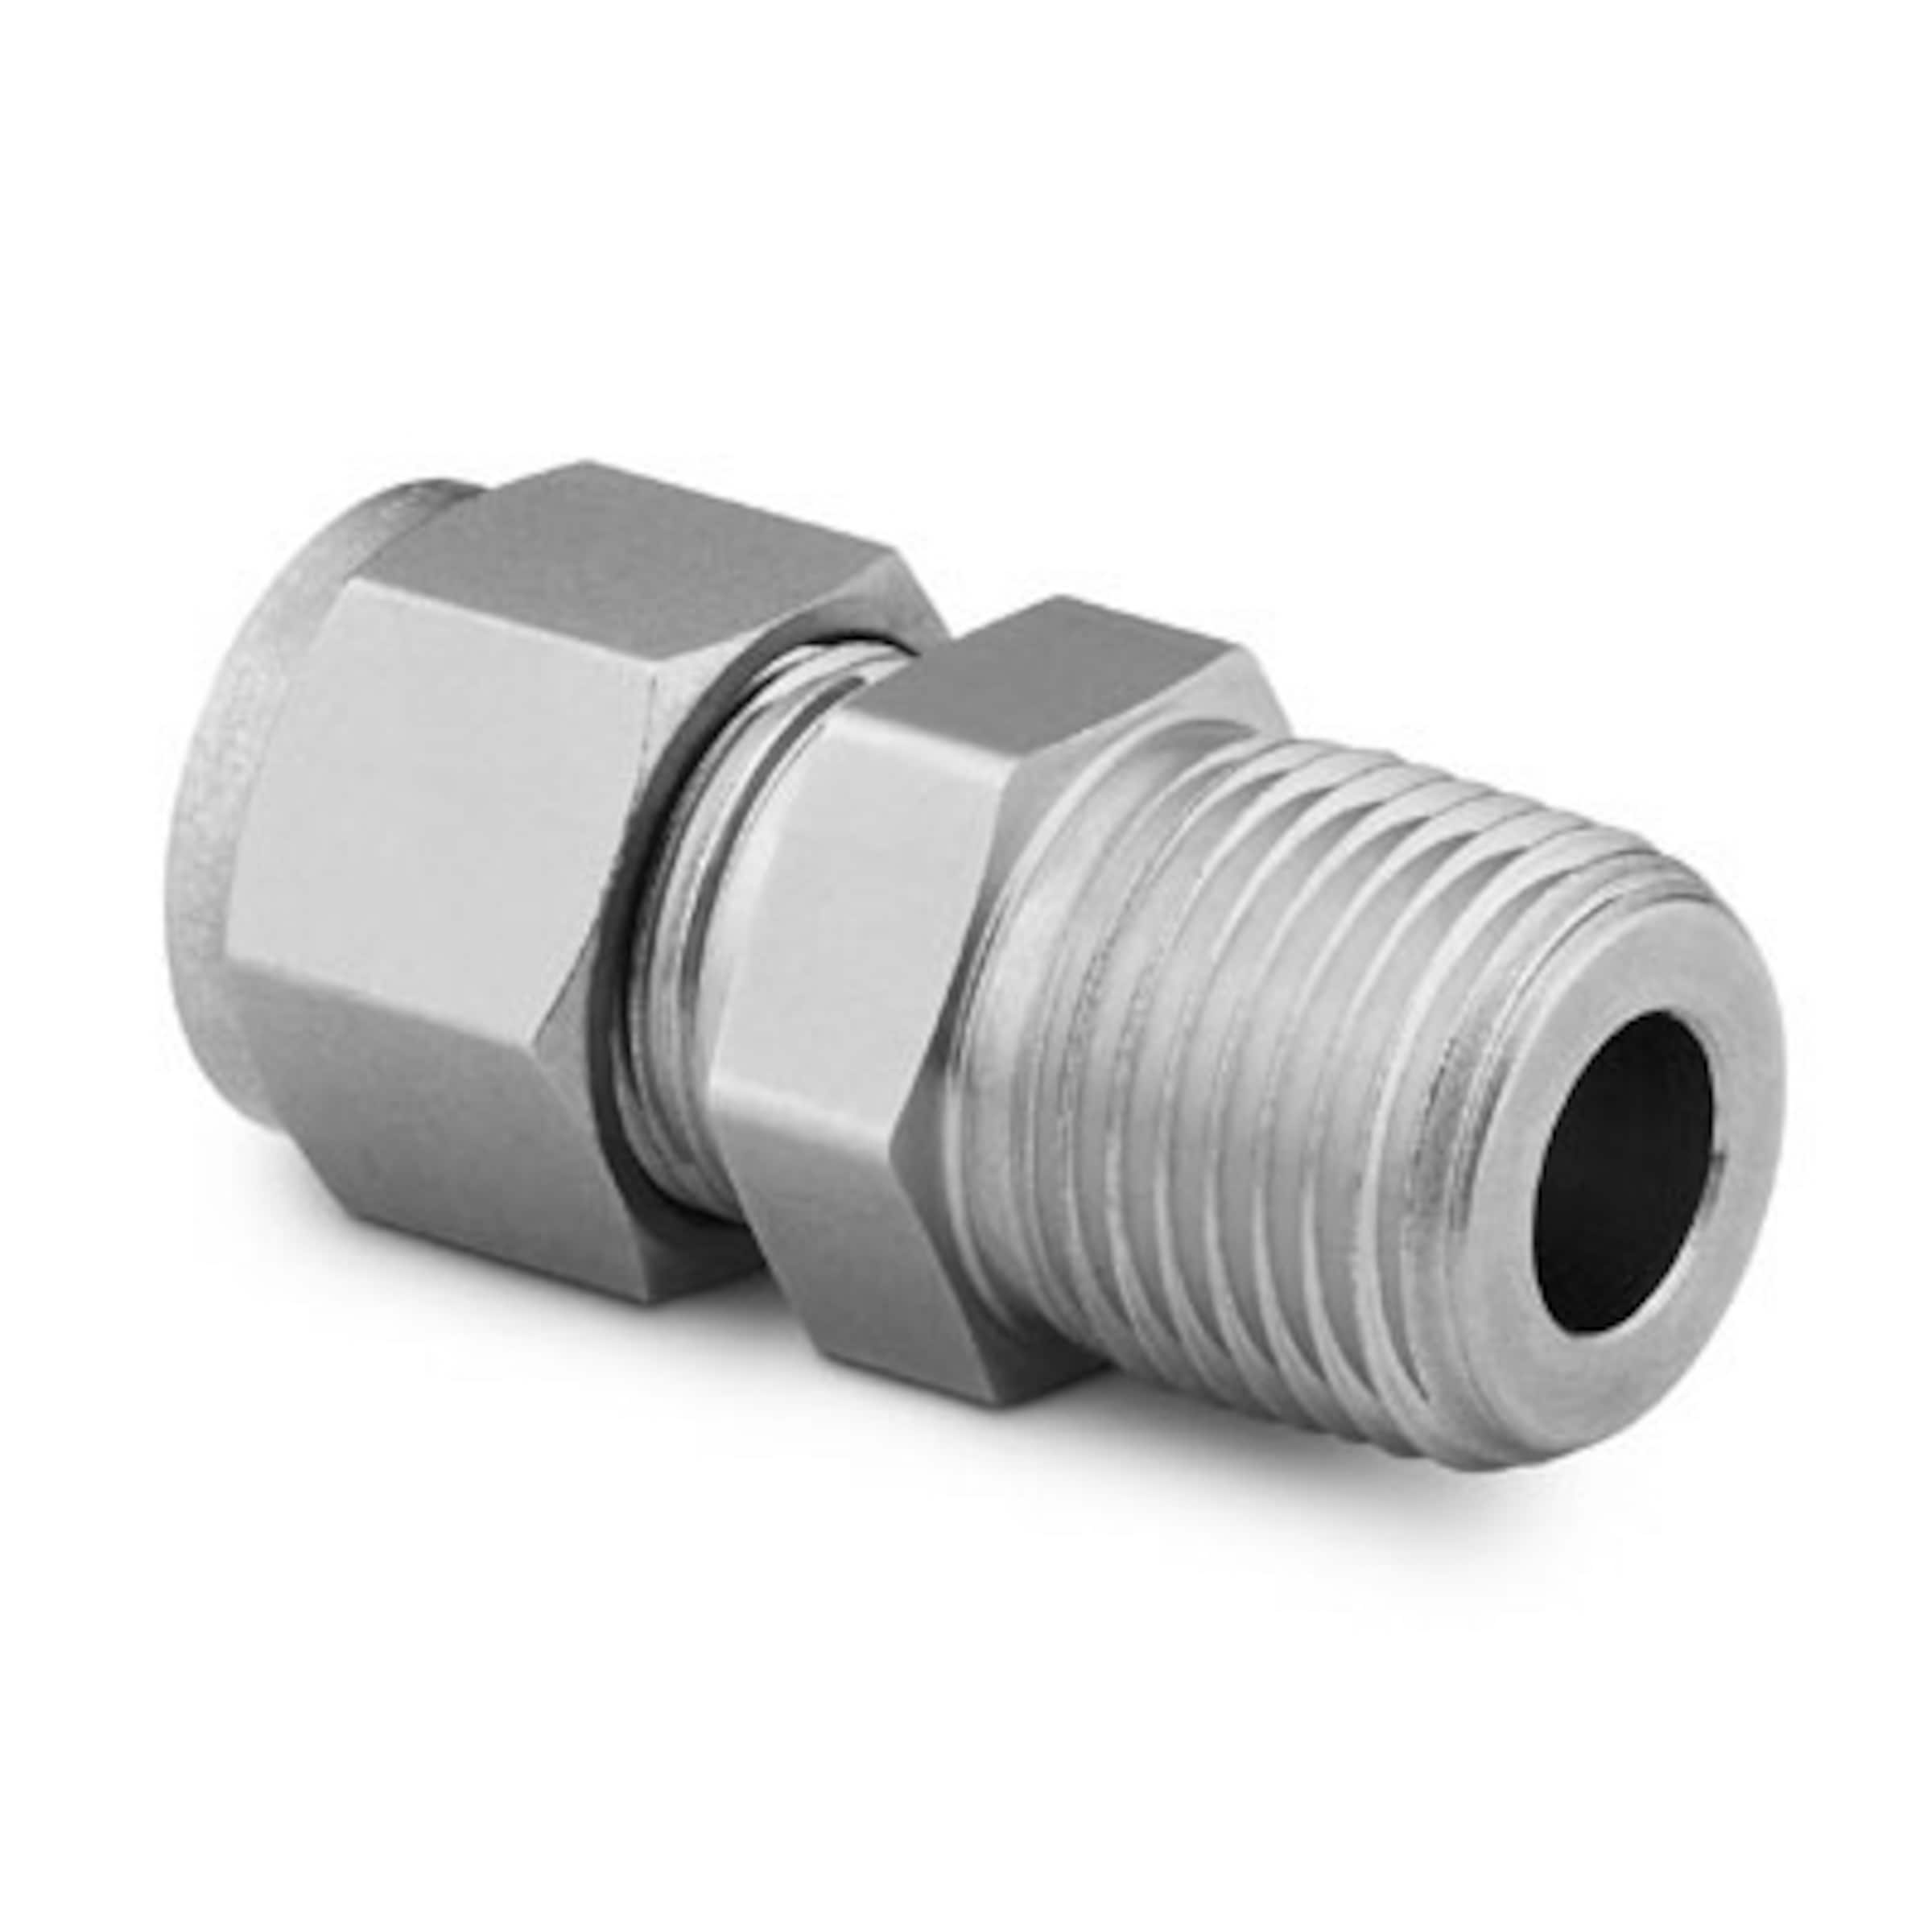 2 Units 3/8 in Instrumentation x 3/8 in Female Pipe Instrumentation Straight Adapter Stainless Steel Brennan 